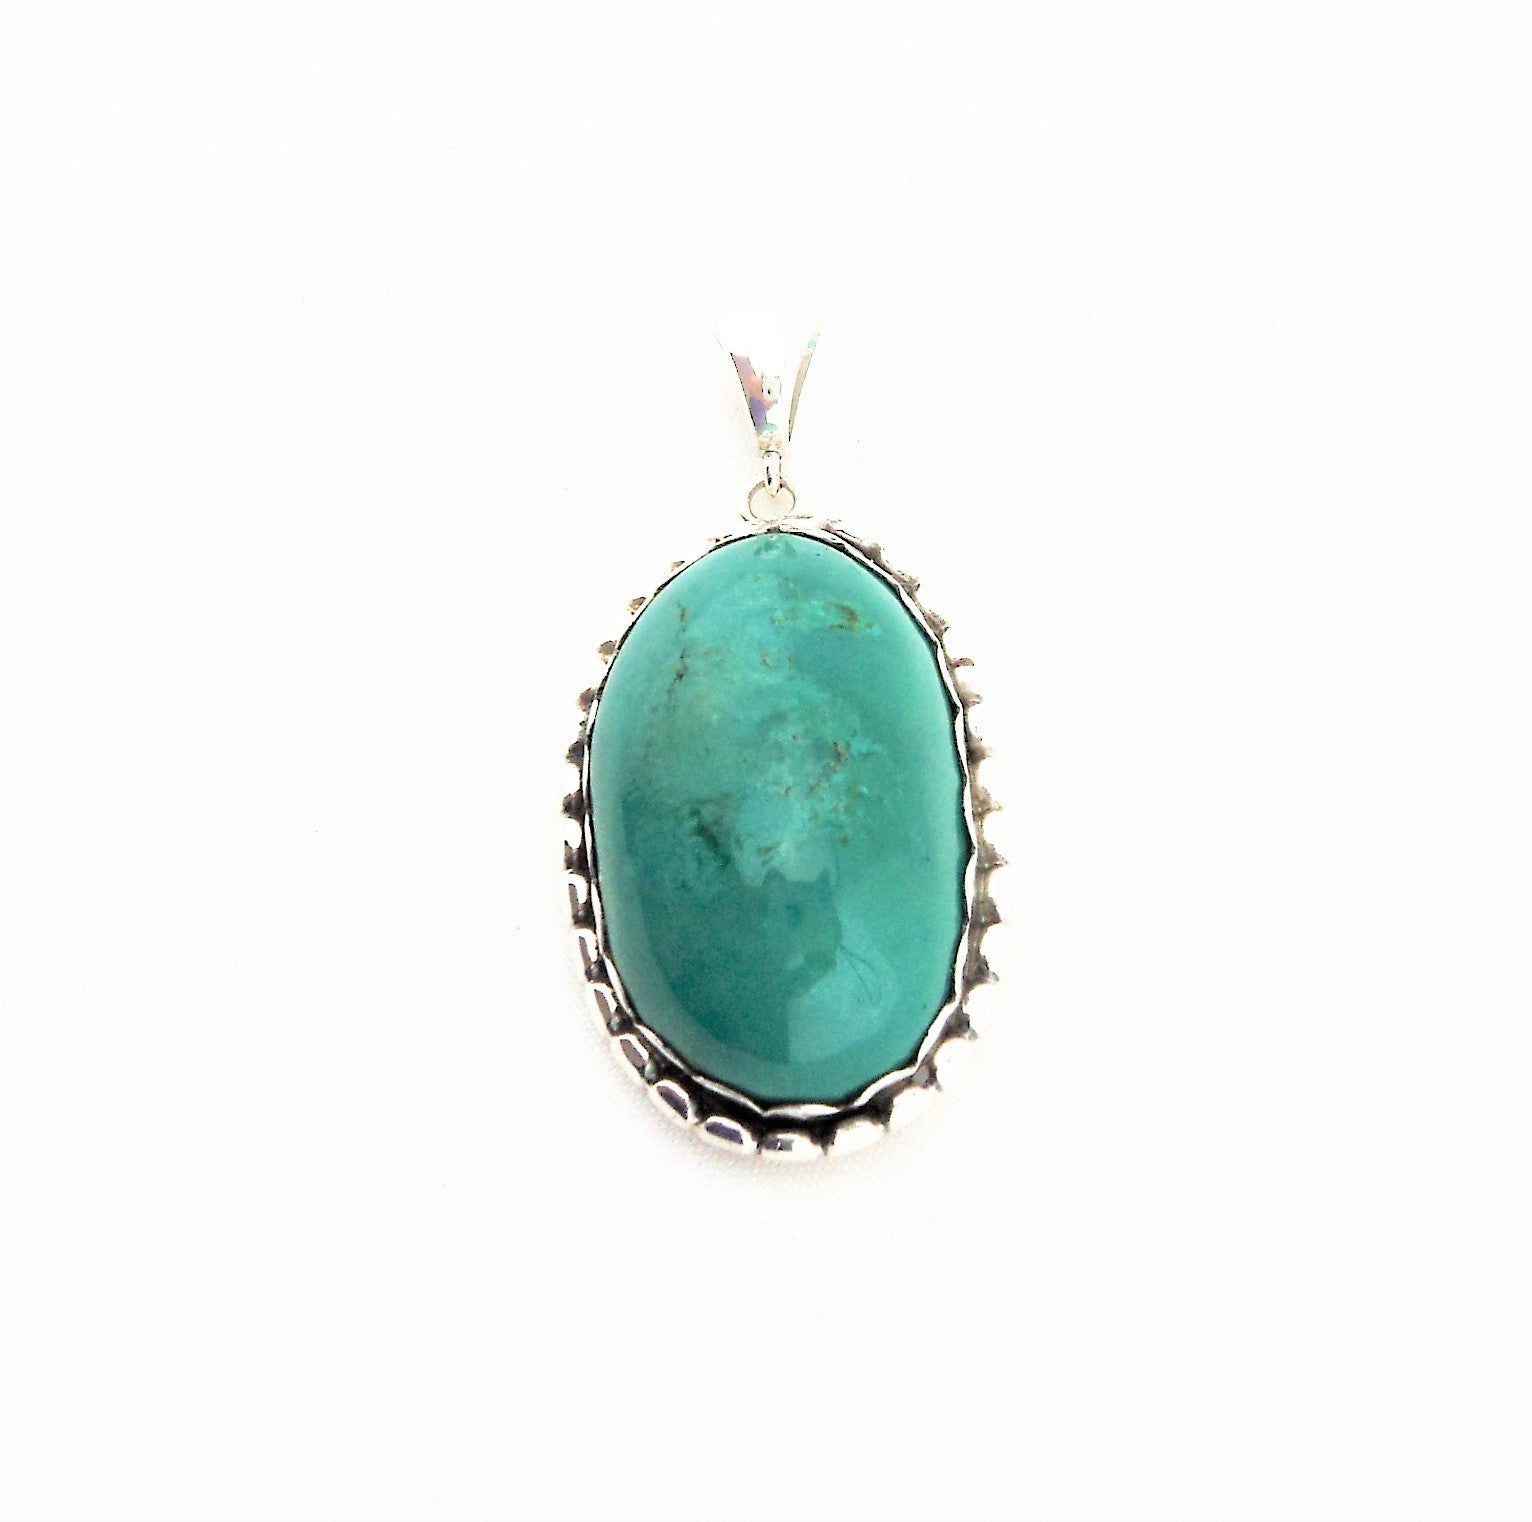 Native American Sterling Silver and Turquoise Cabochon Pendant